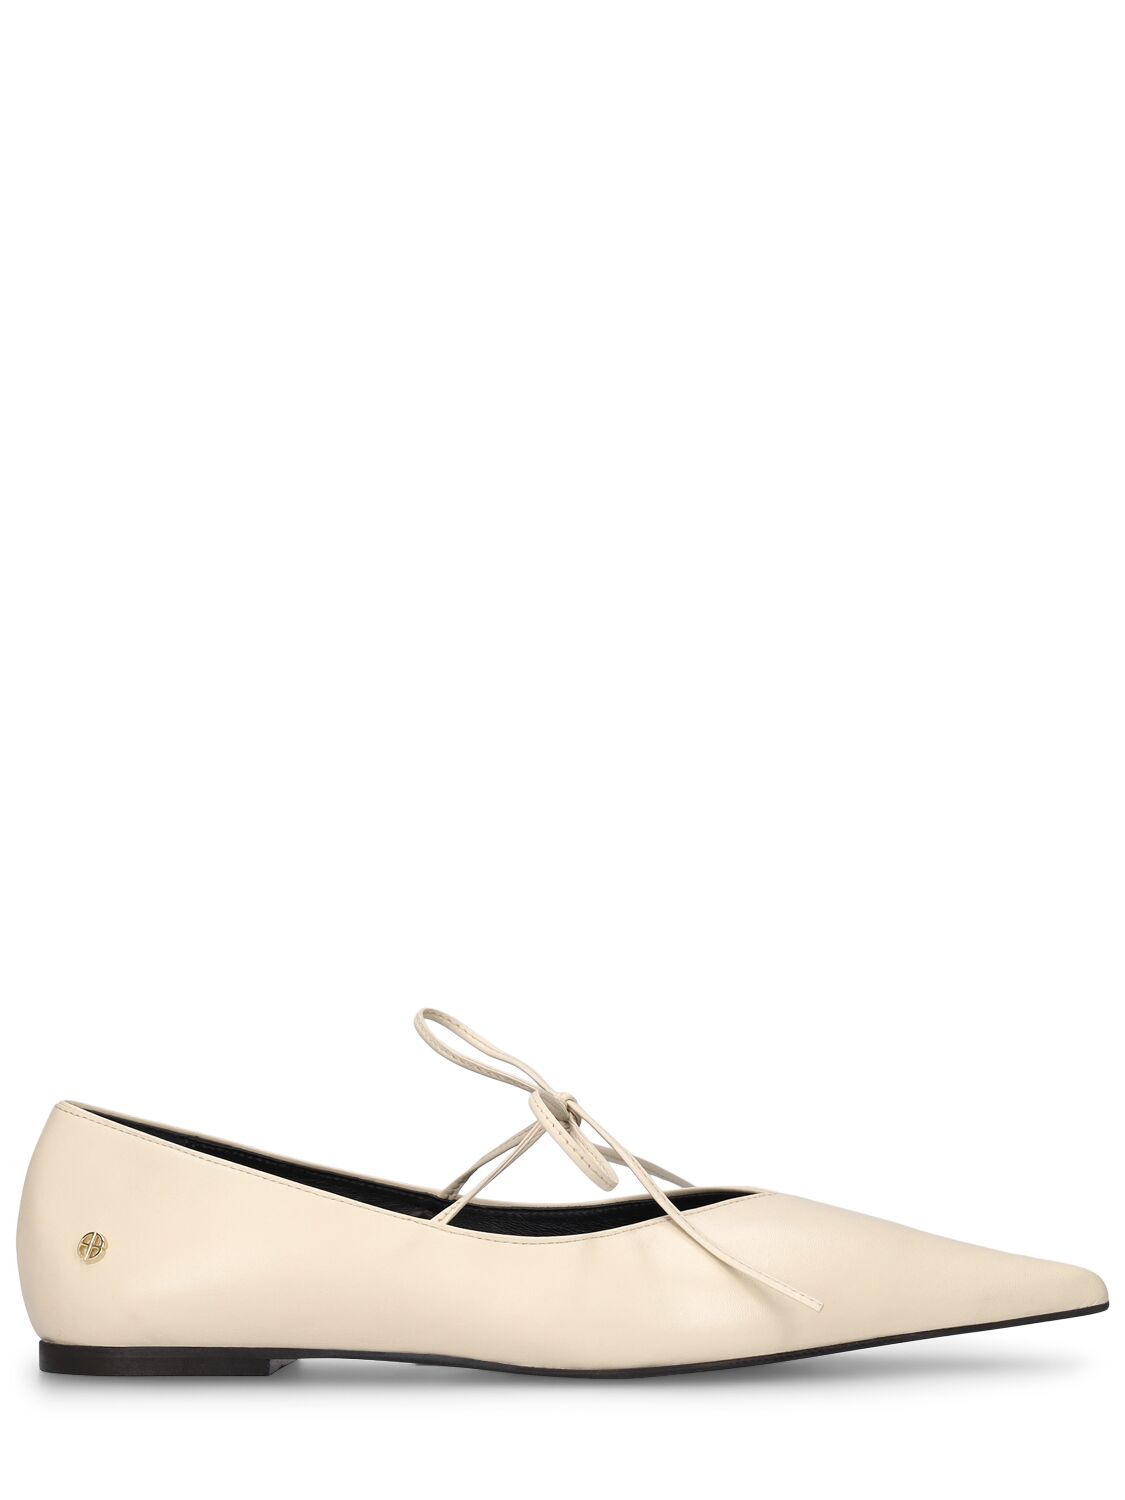 Anine Bing 10mm Nikki Leather Flats In Ivory